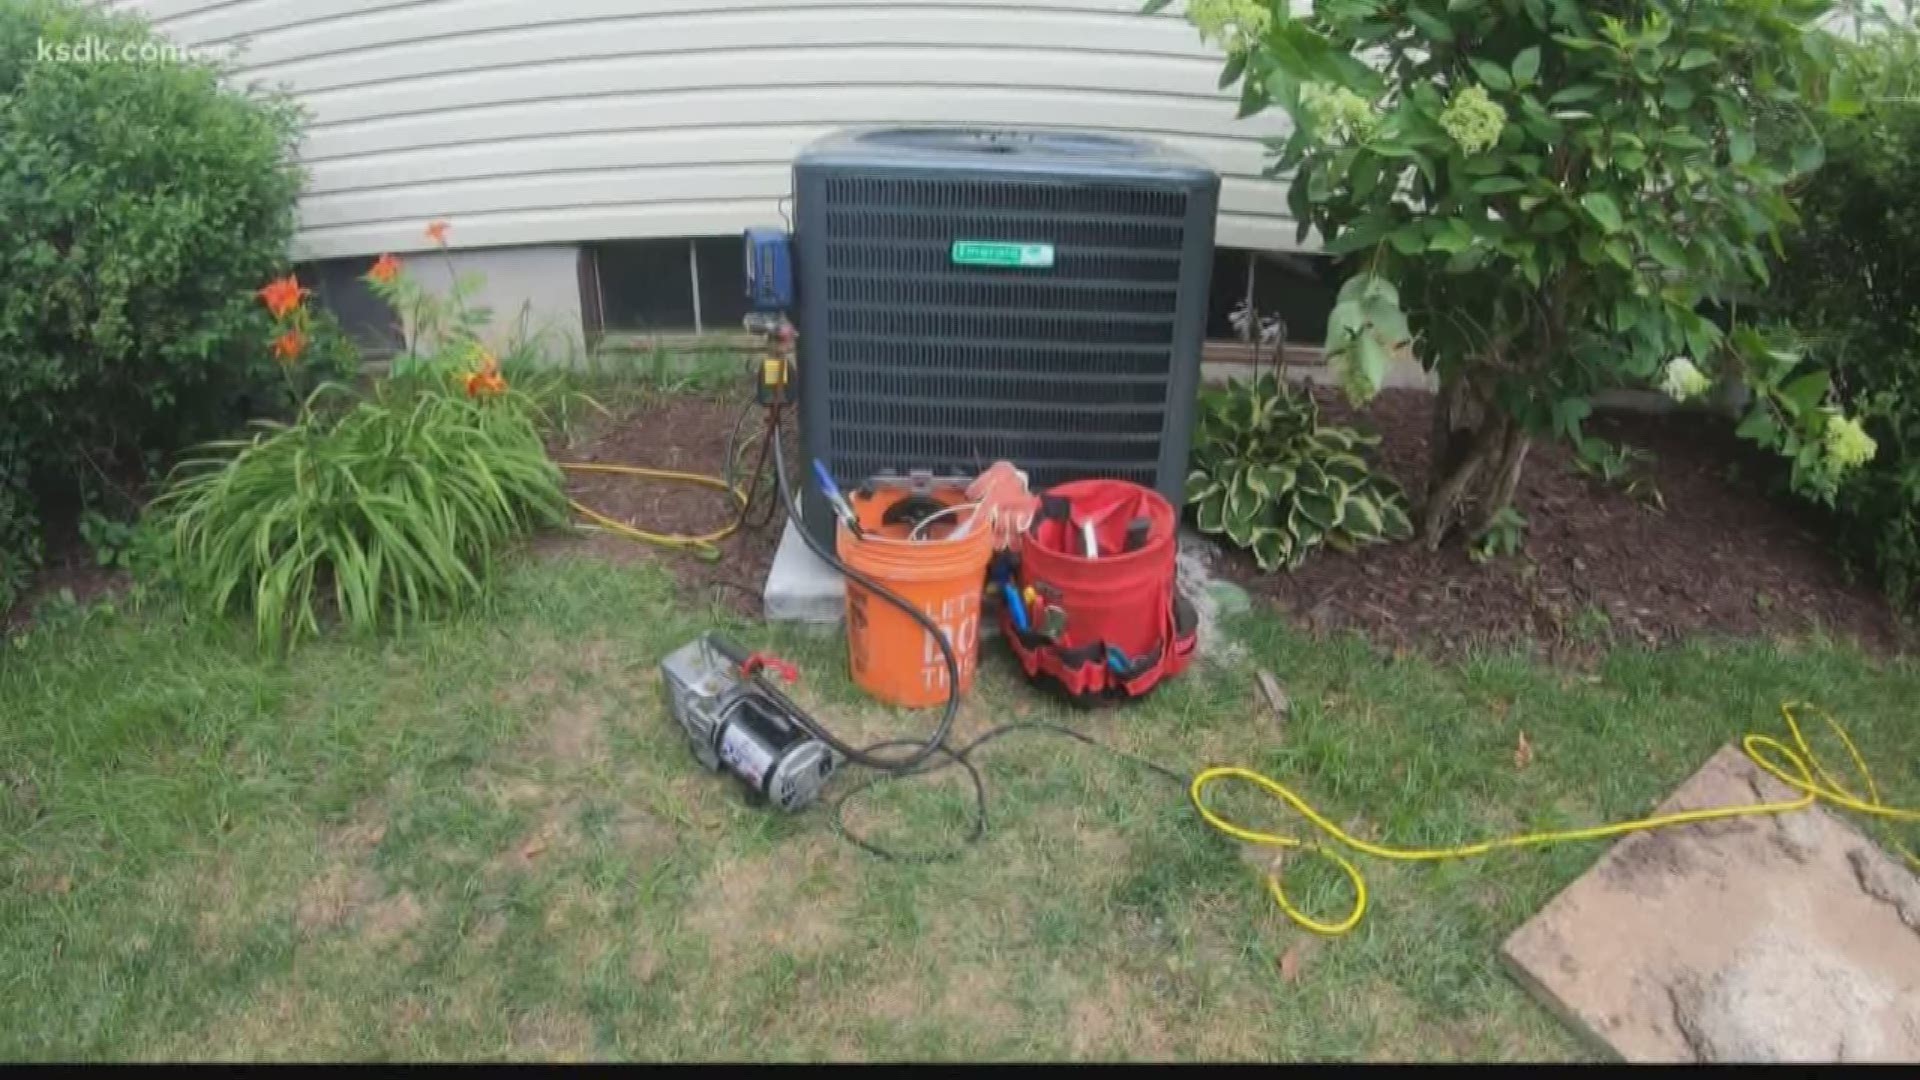 Here's the problem, Freon is a common refrigerant for air conditioners over the age of 10 and is being phased out by the federal government at the end of the year.